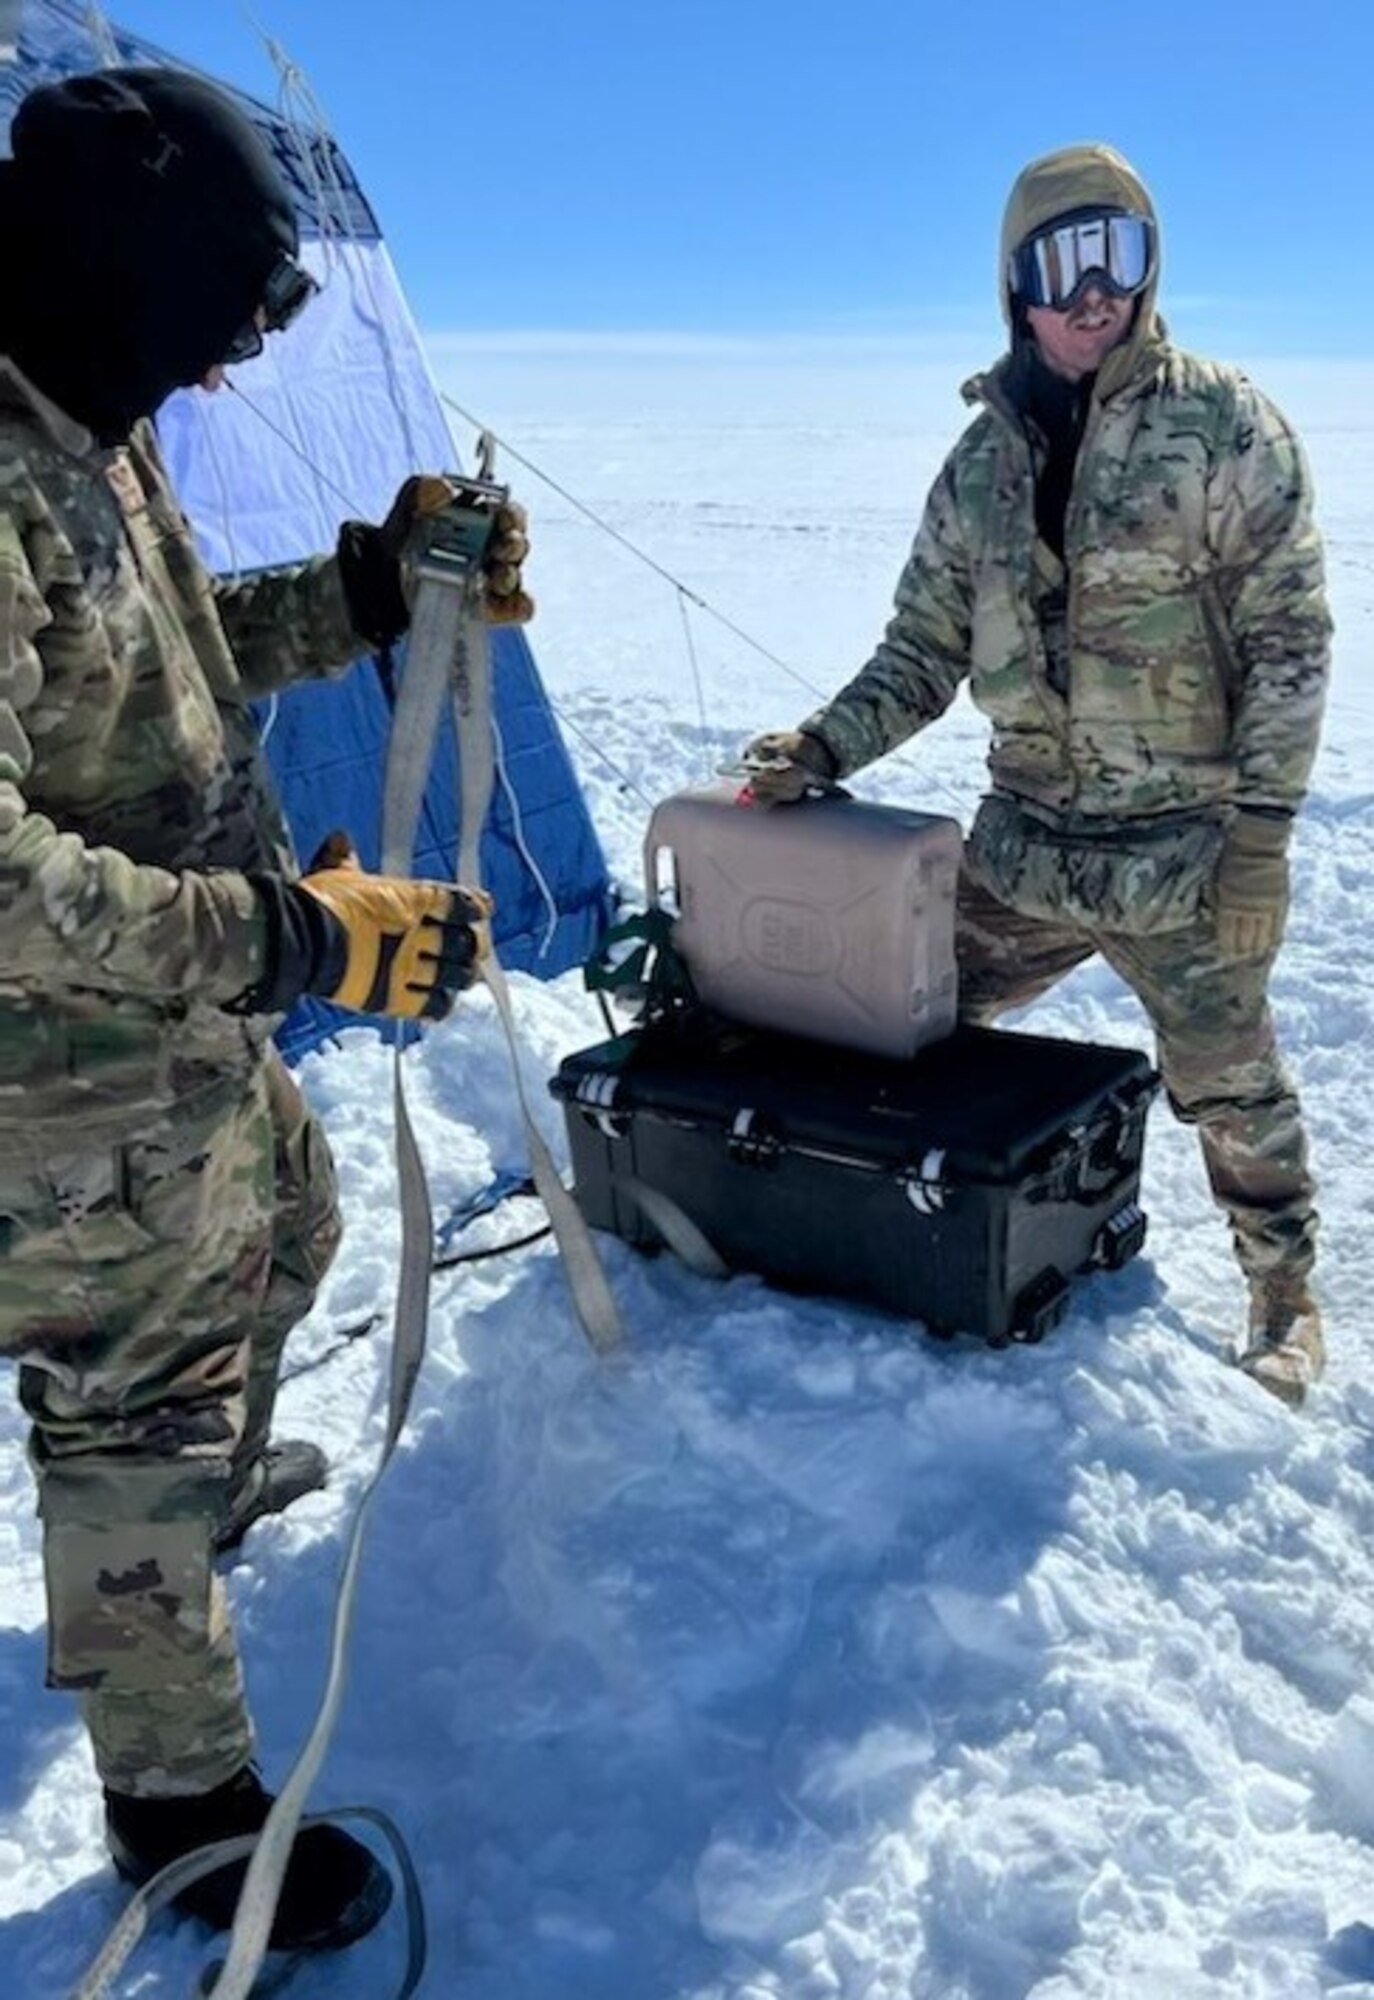 U.S. Air Force Senior Master Sgt. Jeremiah Wickenhauser, right, Superintendent of 133rd Contingency Response Flight, helps set up fuel for a camp heater in Kangerlussuaq, Greenland, May 15, 2022.